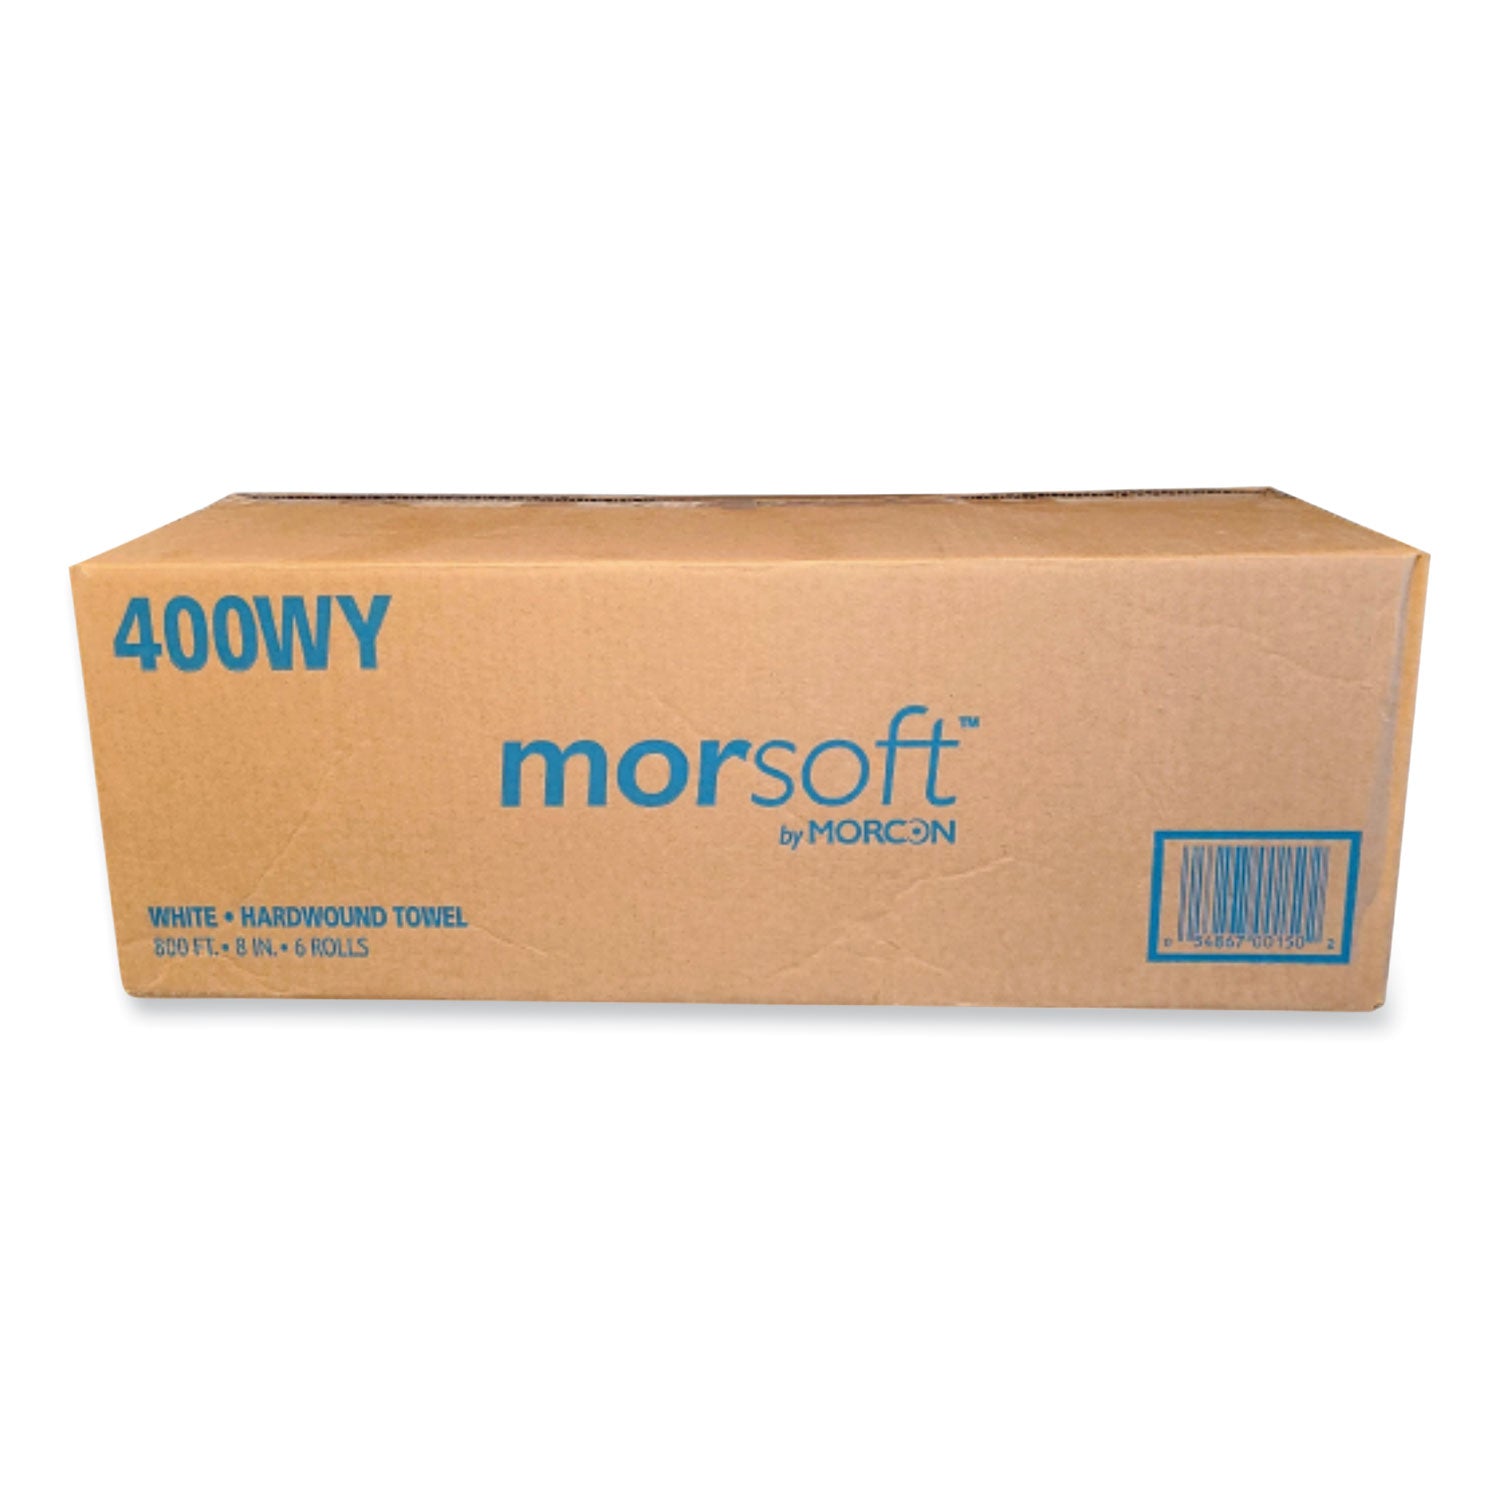 morsoft-controlled-towels-y-notch-1-ply-8-x-800-ft-white-6-rolls-carton_mor400wy - 5